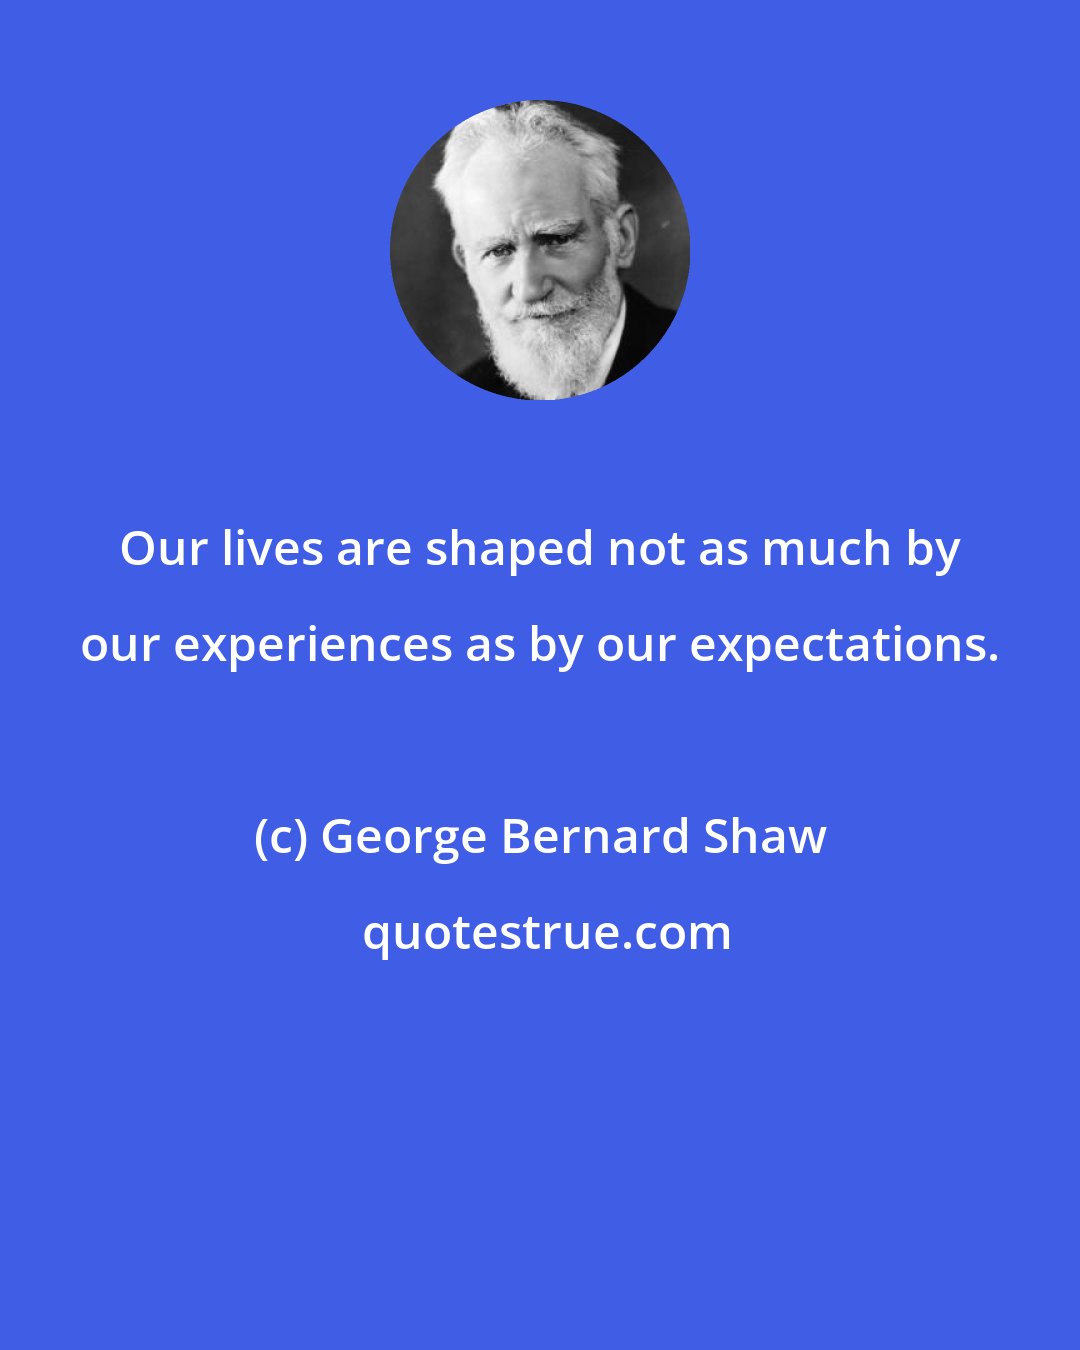 George Bernard Shaw: Our lives are shaped not as much by our experiences as by our expectations.